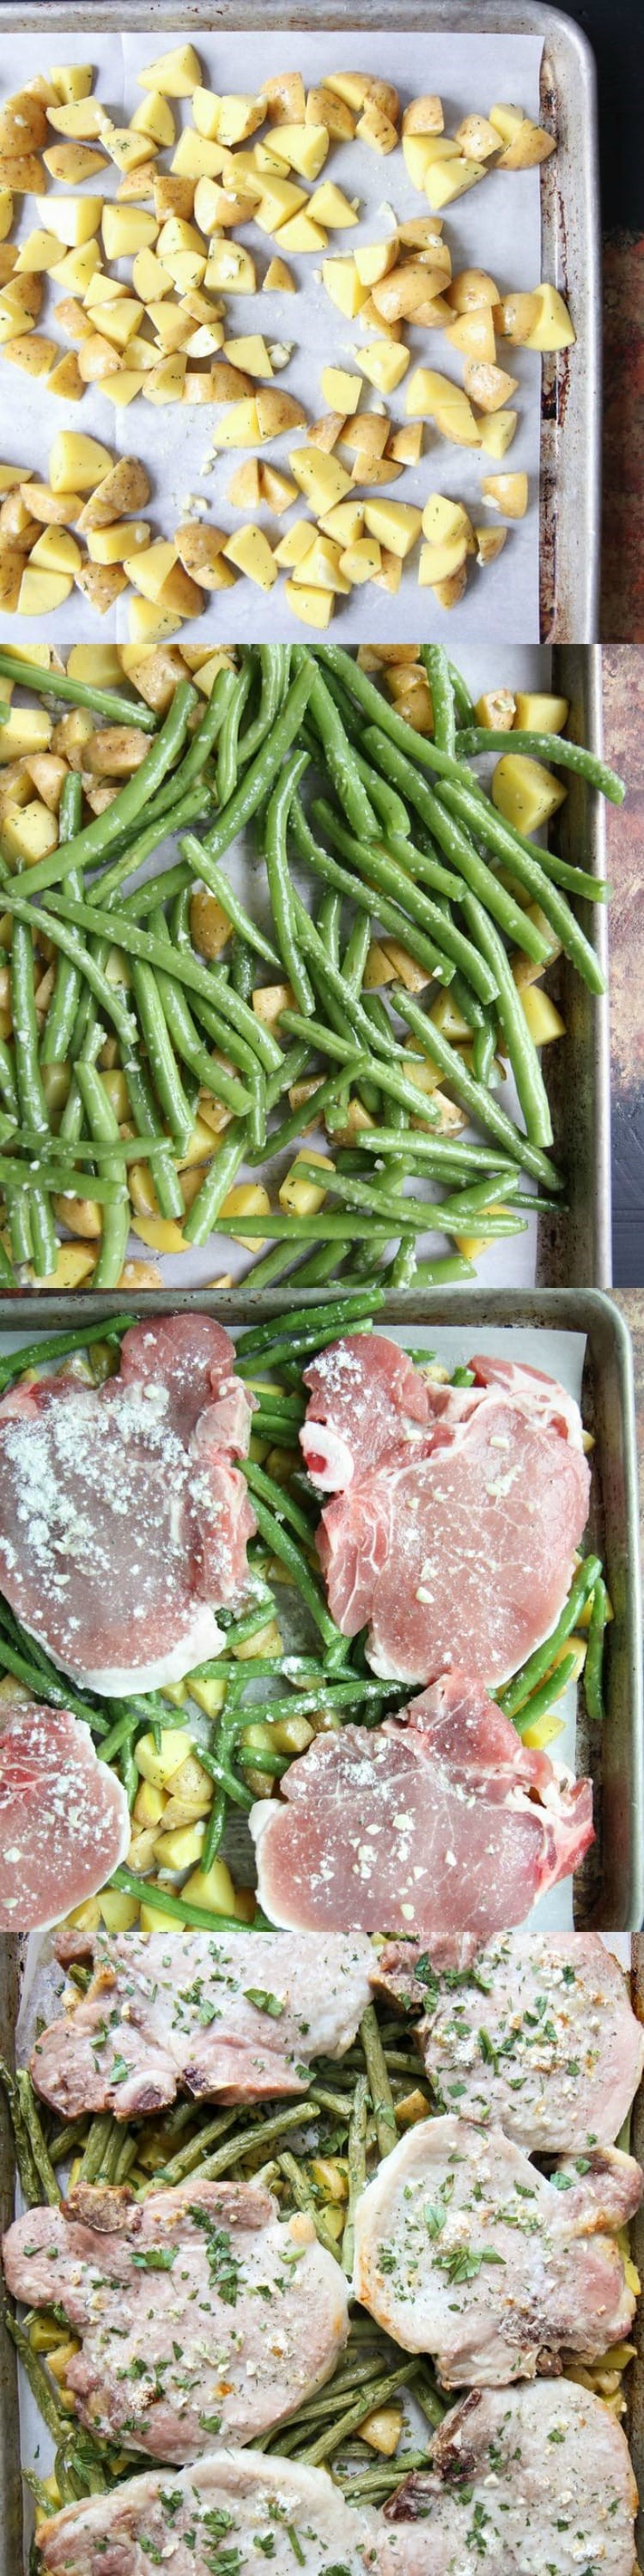 Sheet Pan Ranch Chops and Veggies from MomAdvice.com